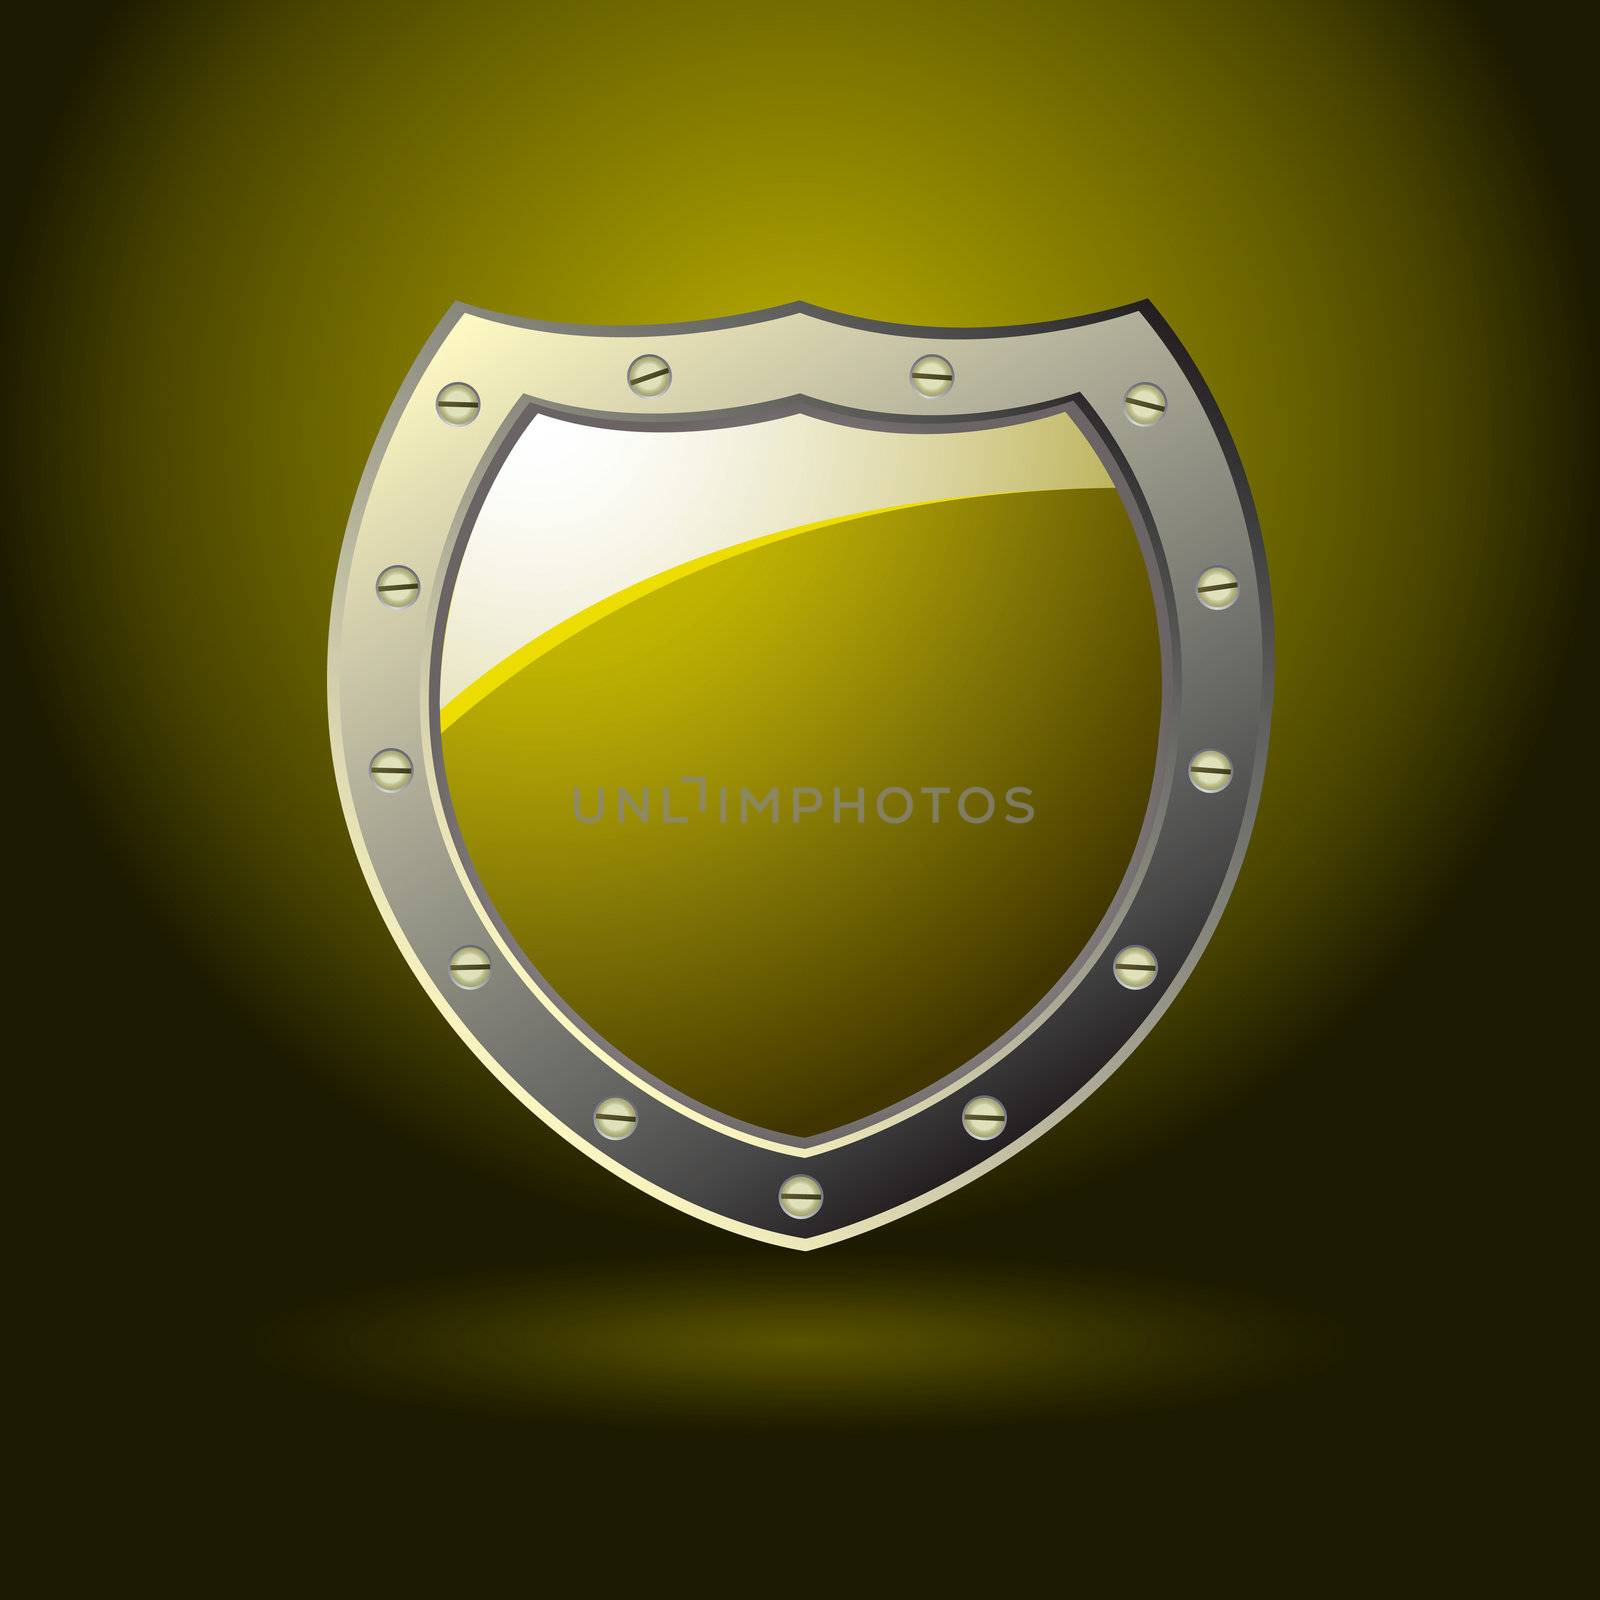 Blank golden shield with room for text and silver bevel